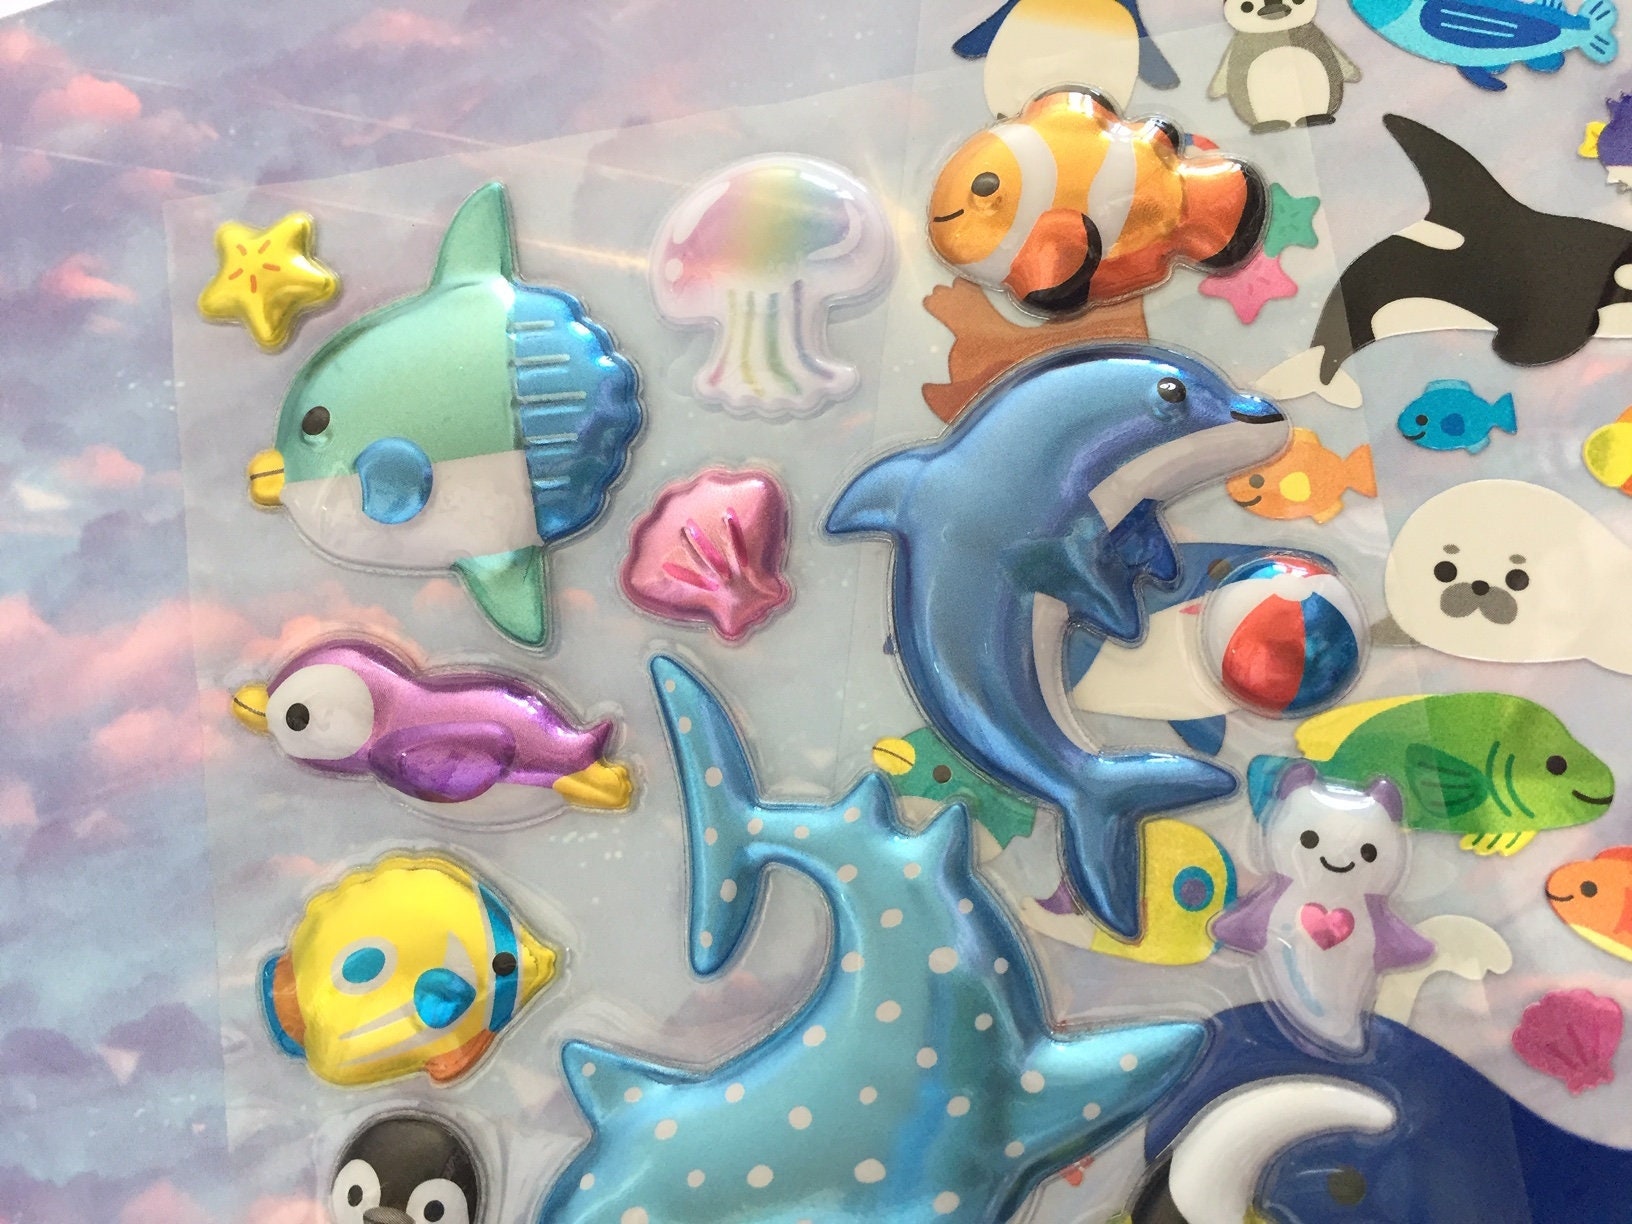 Fulmoon 288 Pieces/12 Sheets Kids Sea Animal Stickers 3D Puffy